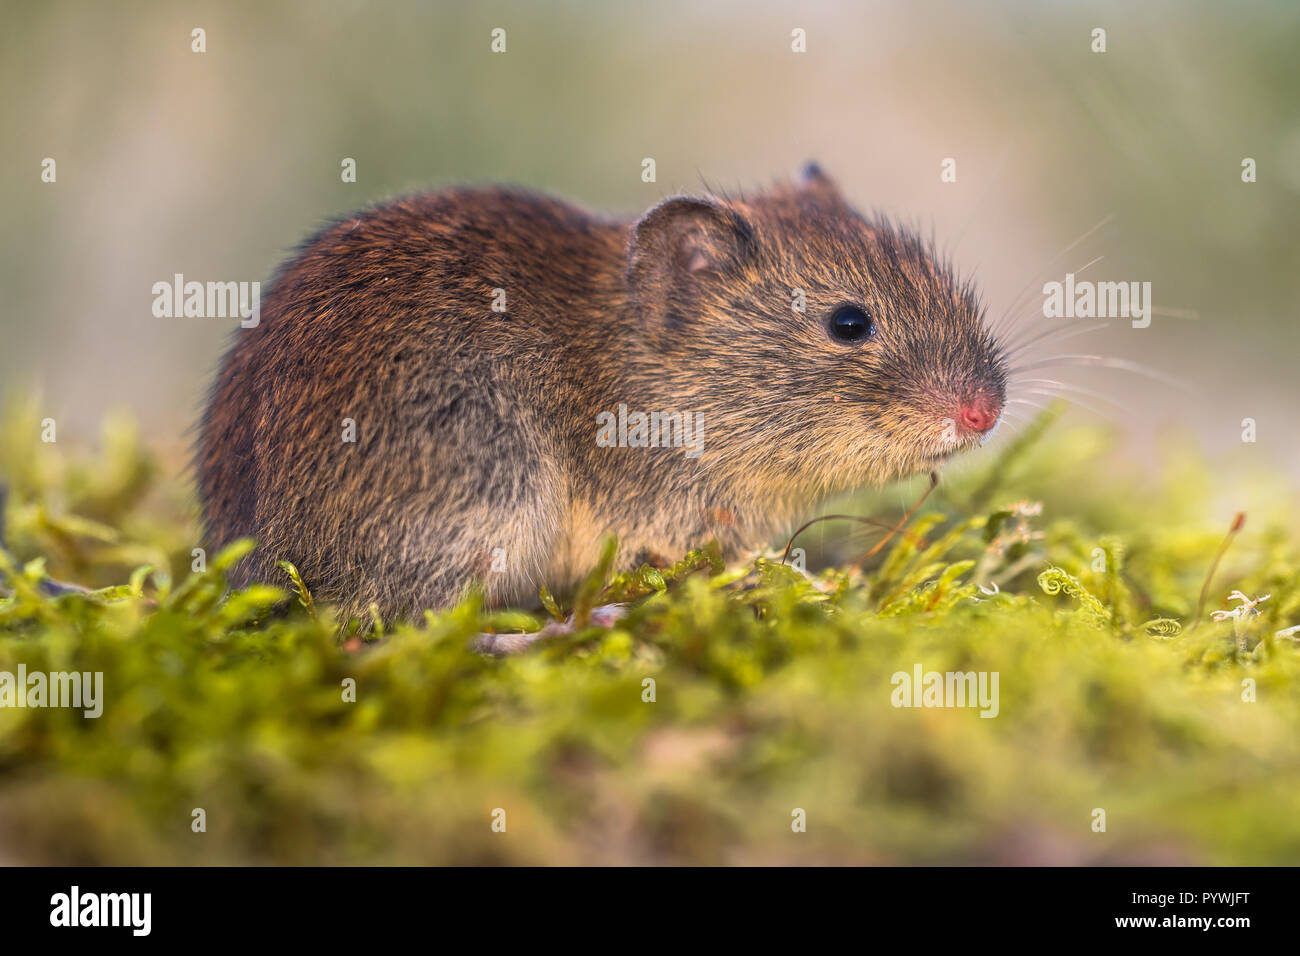 Bank vole (Myodes glareolus; formerly Clethrionomys glareolus). Small vole with red-brown fur in natural environment Stock Photo